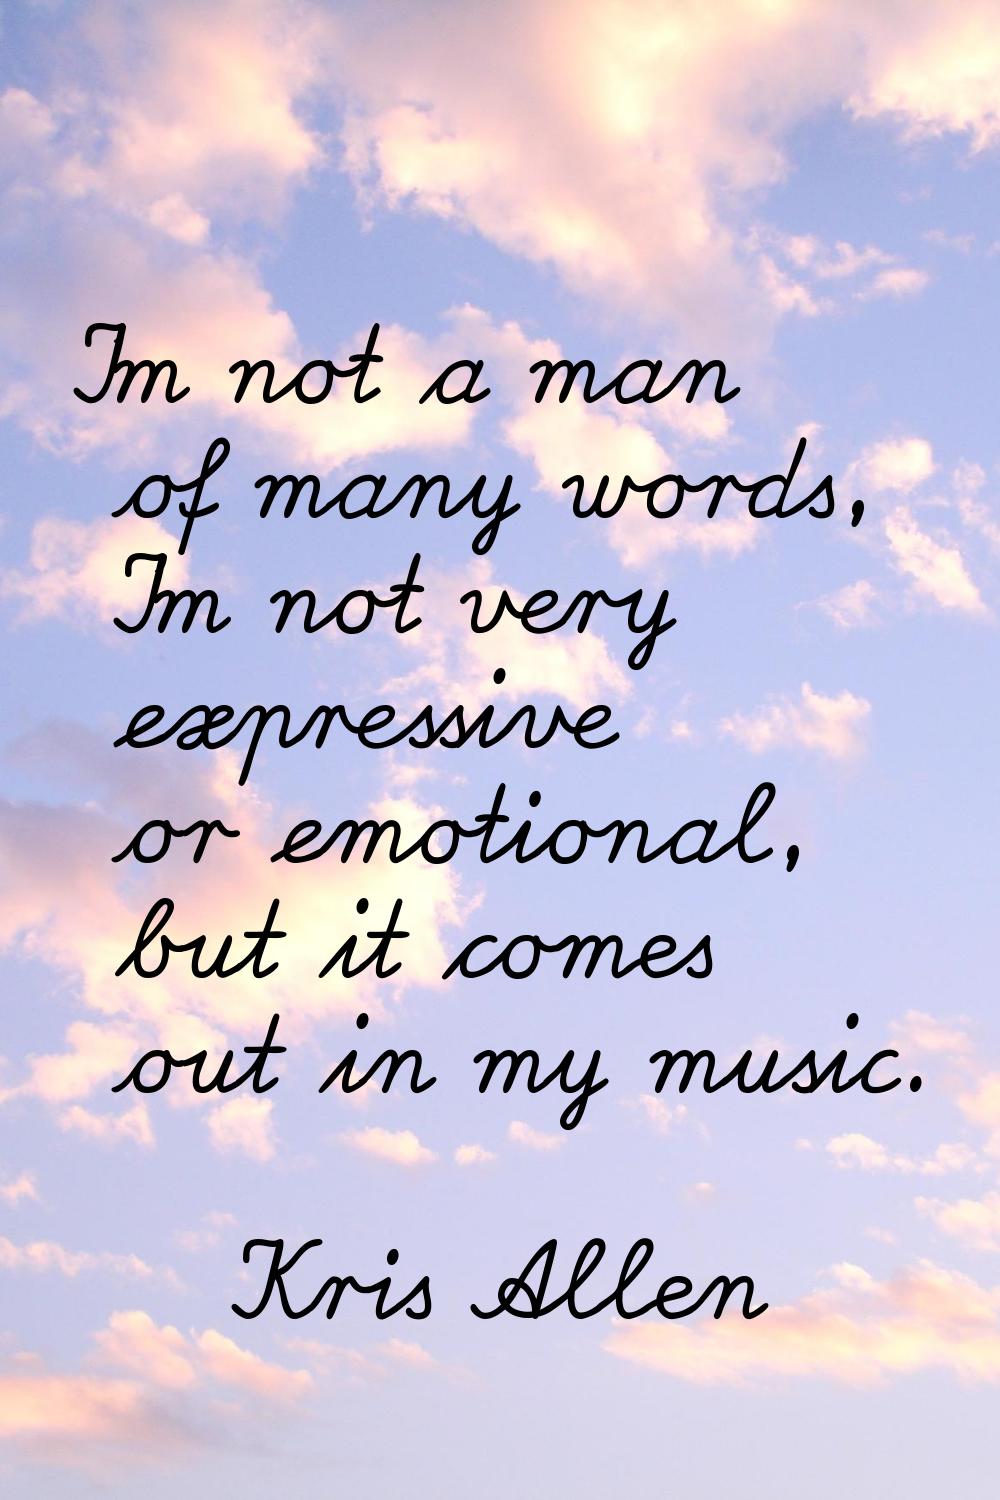 I'm not a man of many words, I'm not very expressive or emotional, but it comes out in my music.